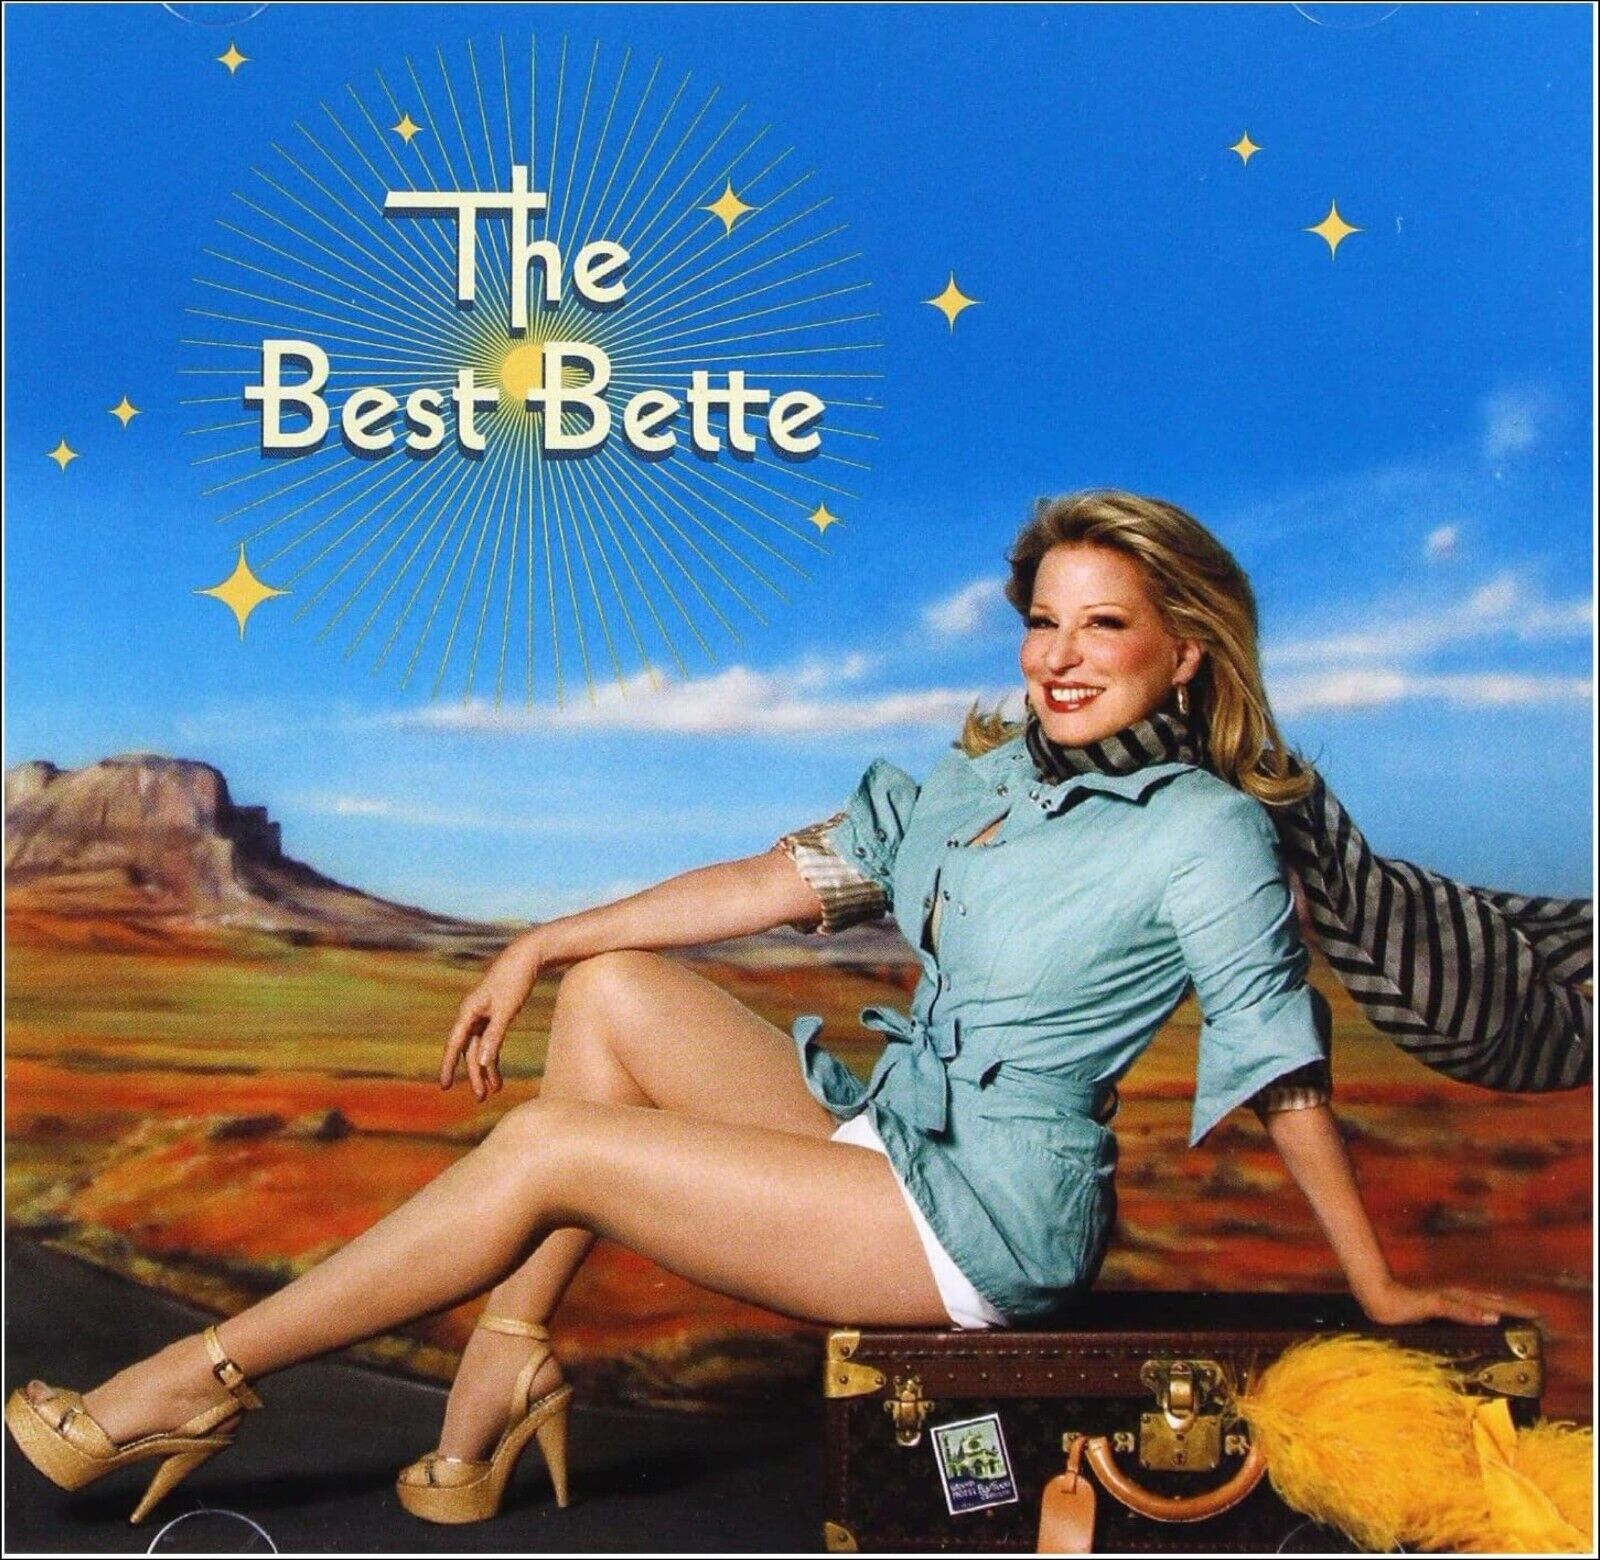 BETTE MIDLER * 19 Greatest Hits * New CD * All Original Recordings * NEW